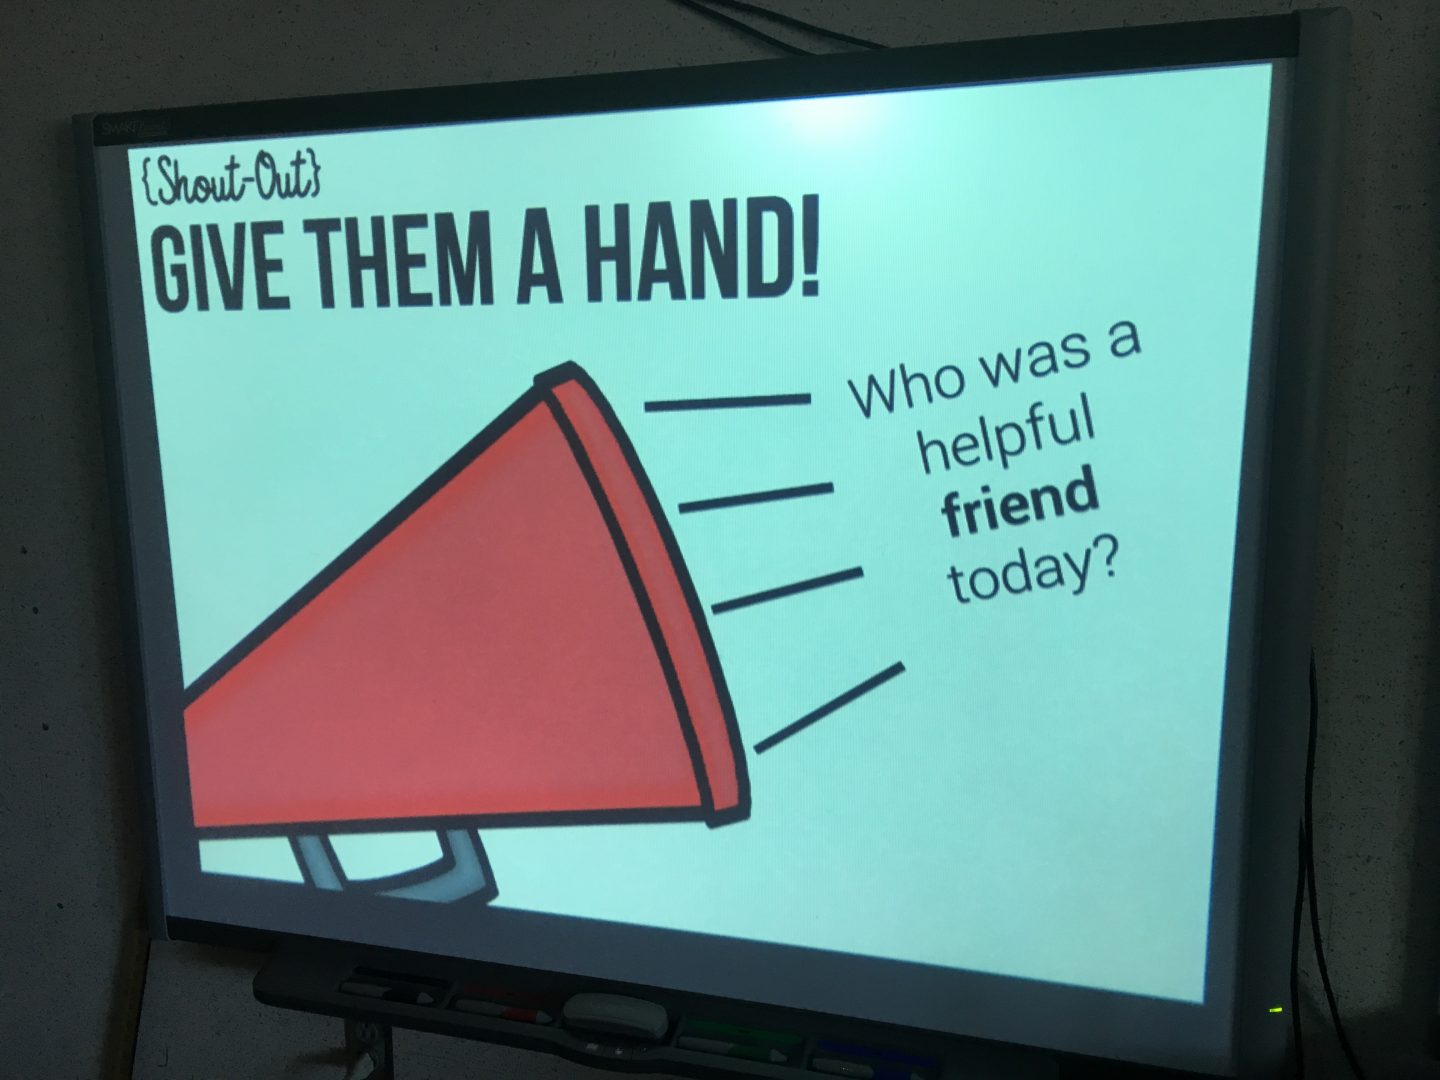 paperless afternoon meeting student shout-out slide on whiteboard